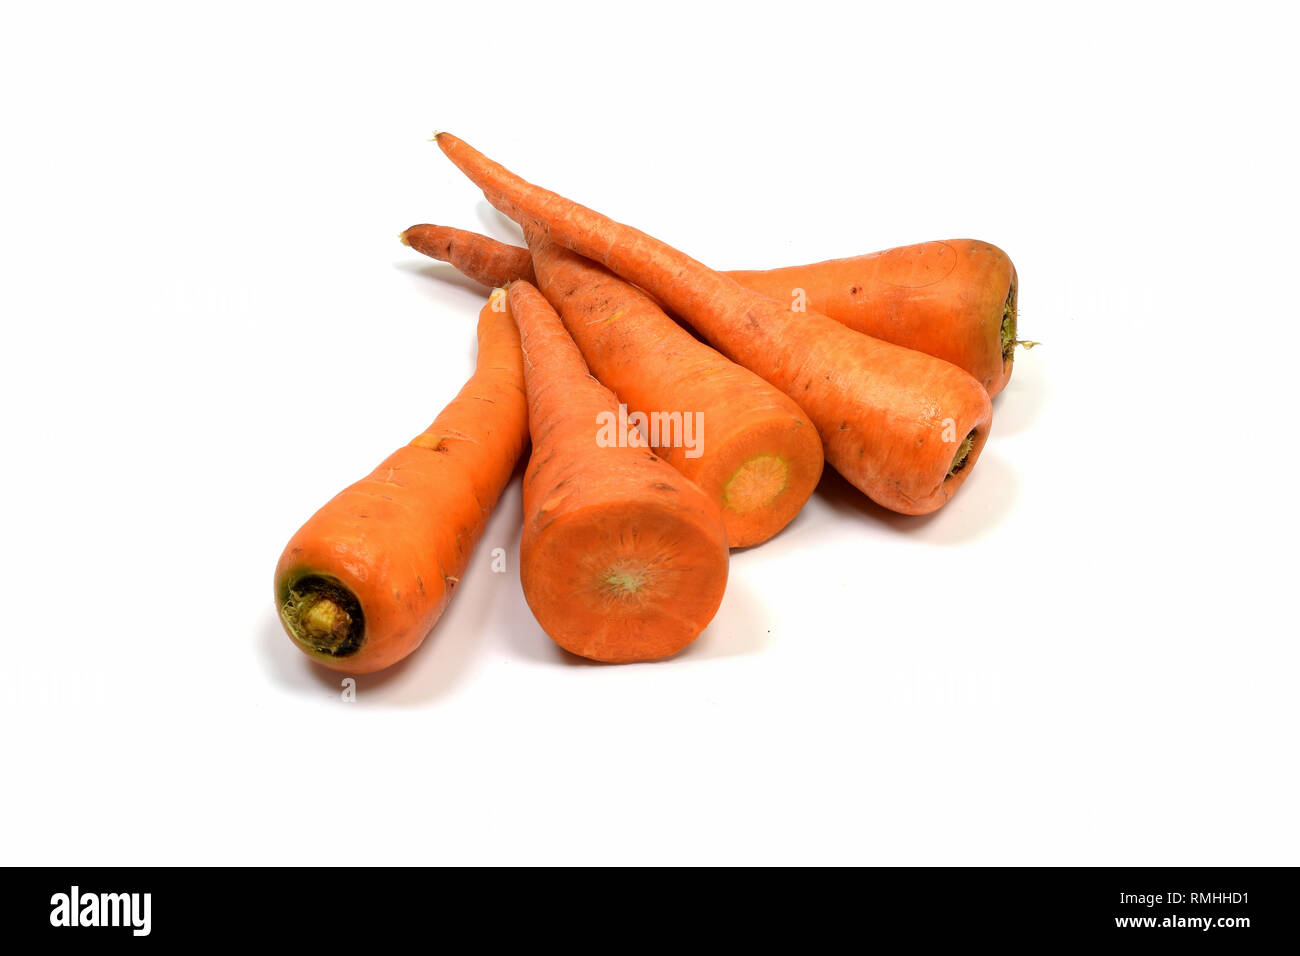 carrots isolated on a white background, road clippings, full depth of field Stock Photo